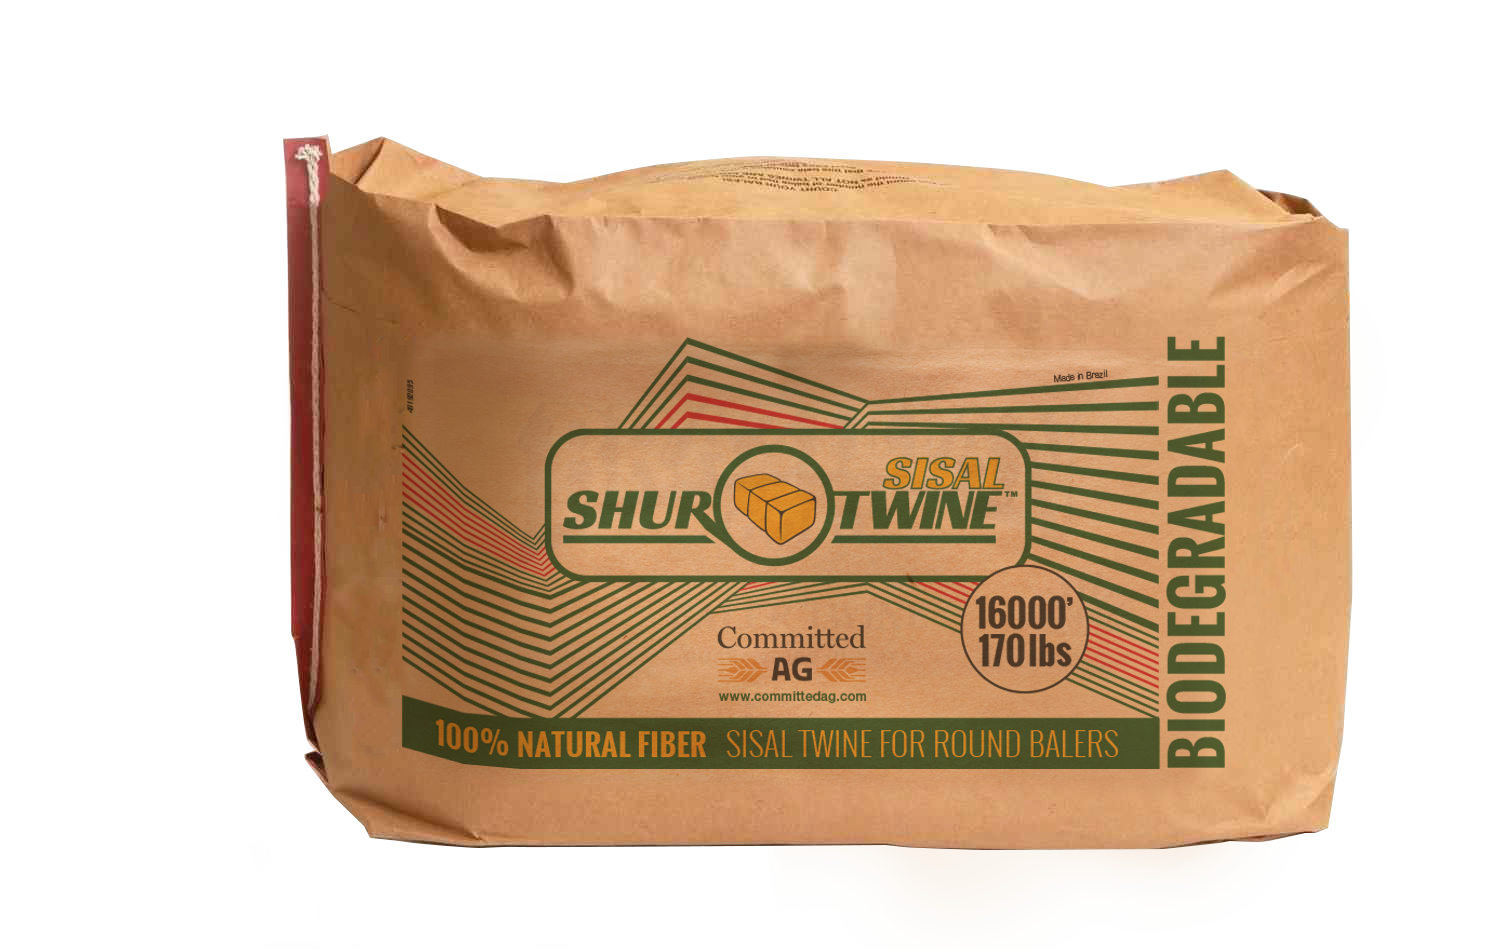 Committed AG | ShurTwine Sisal